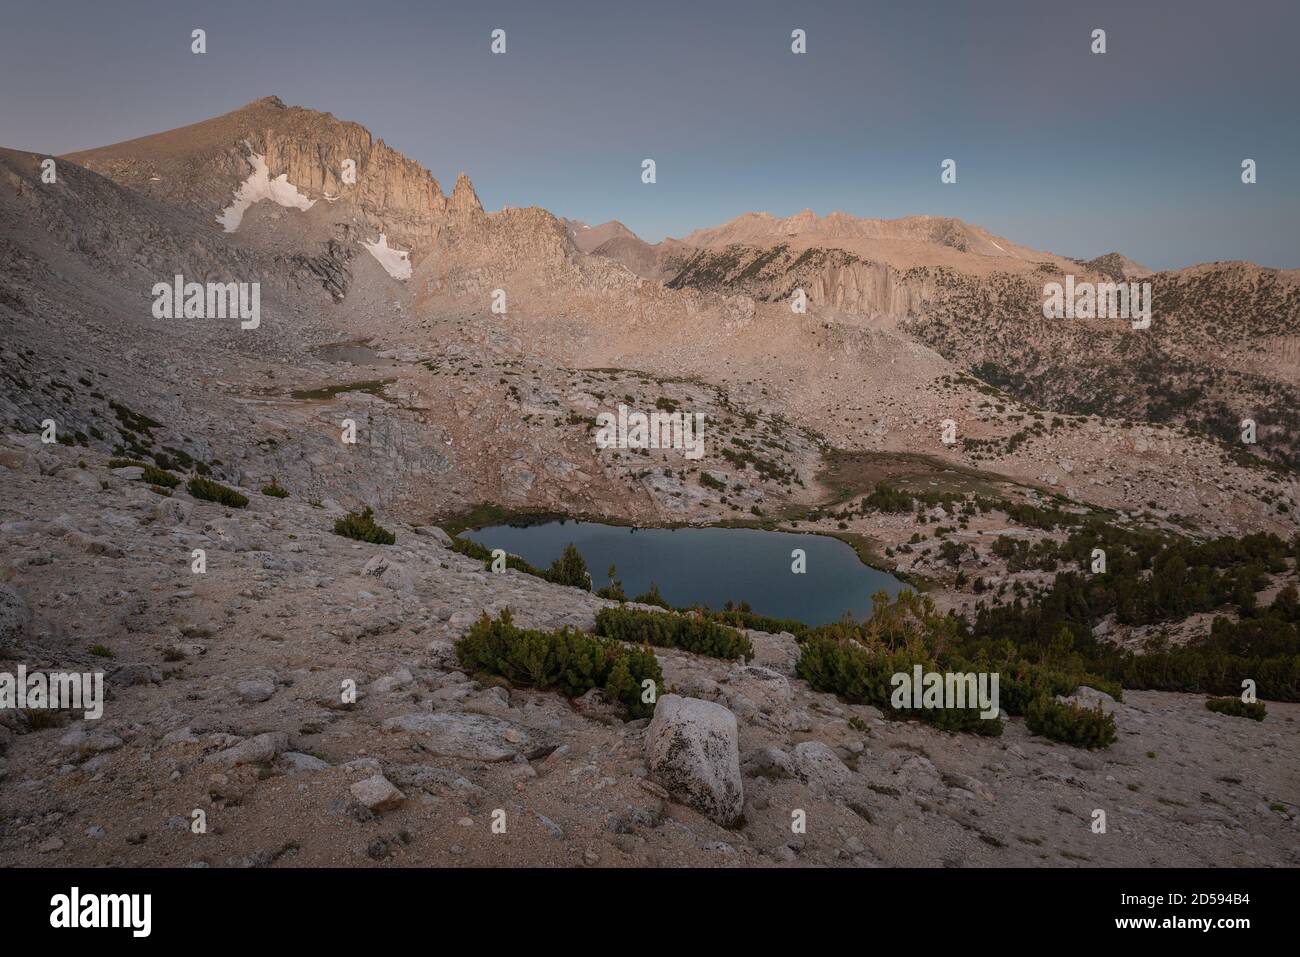 Mountain and lake landscape at dawn, Inyo National Forest, California, USA Stock Photo